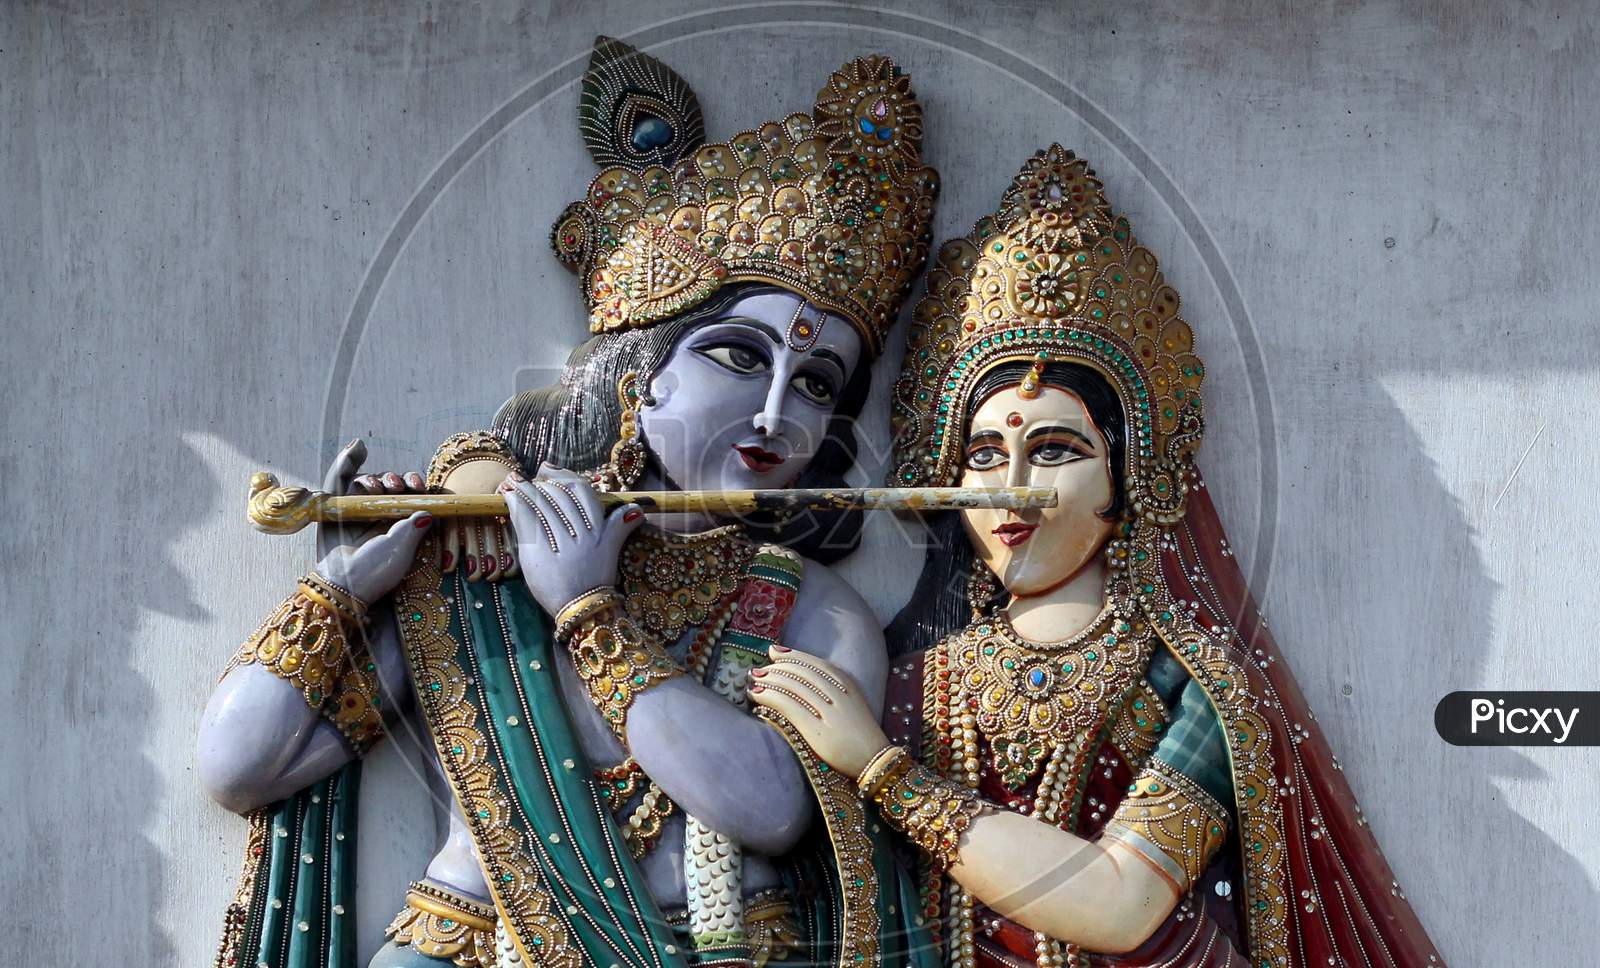 View Of Wooden Carved Indian Hindu God Krishna And Goddess Radha In A Temple